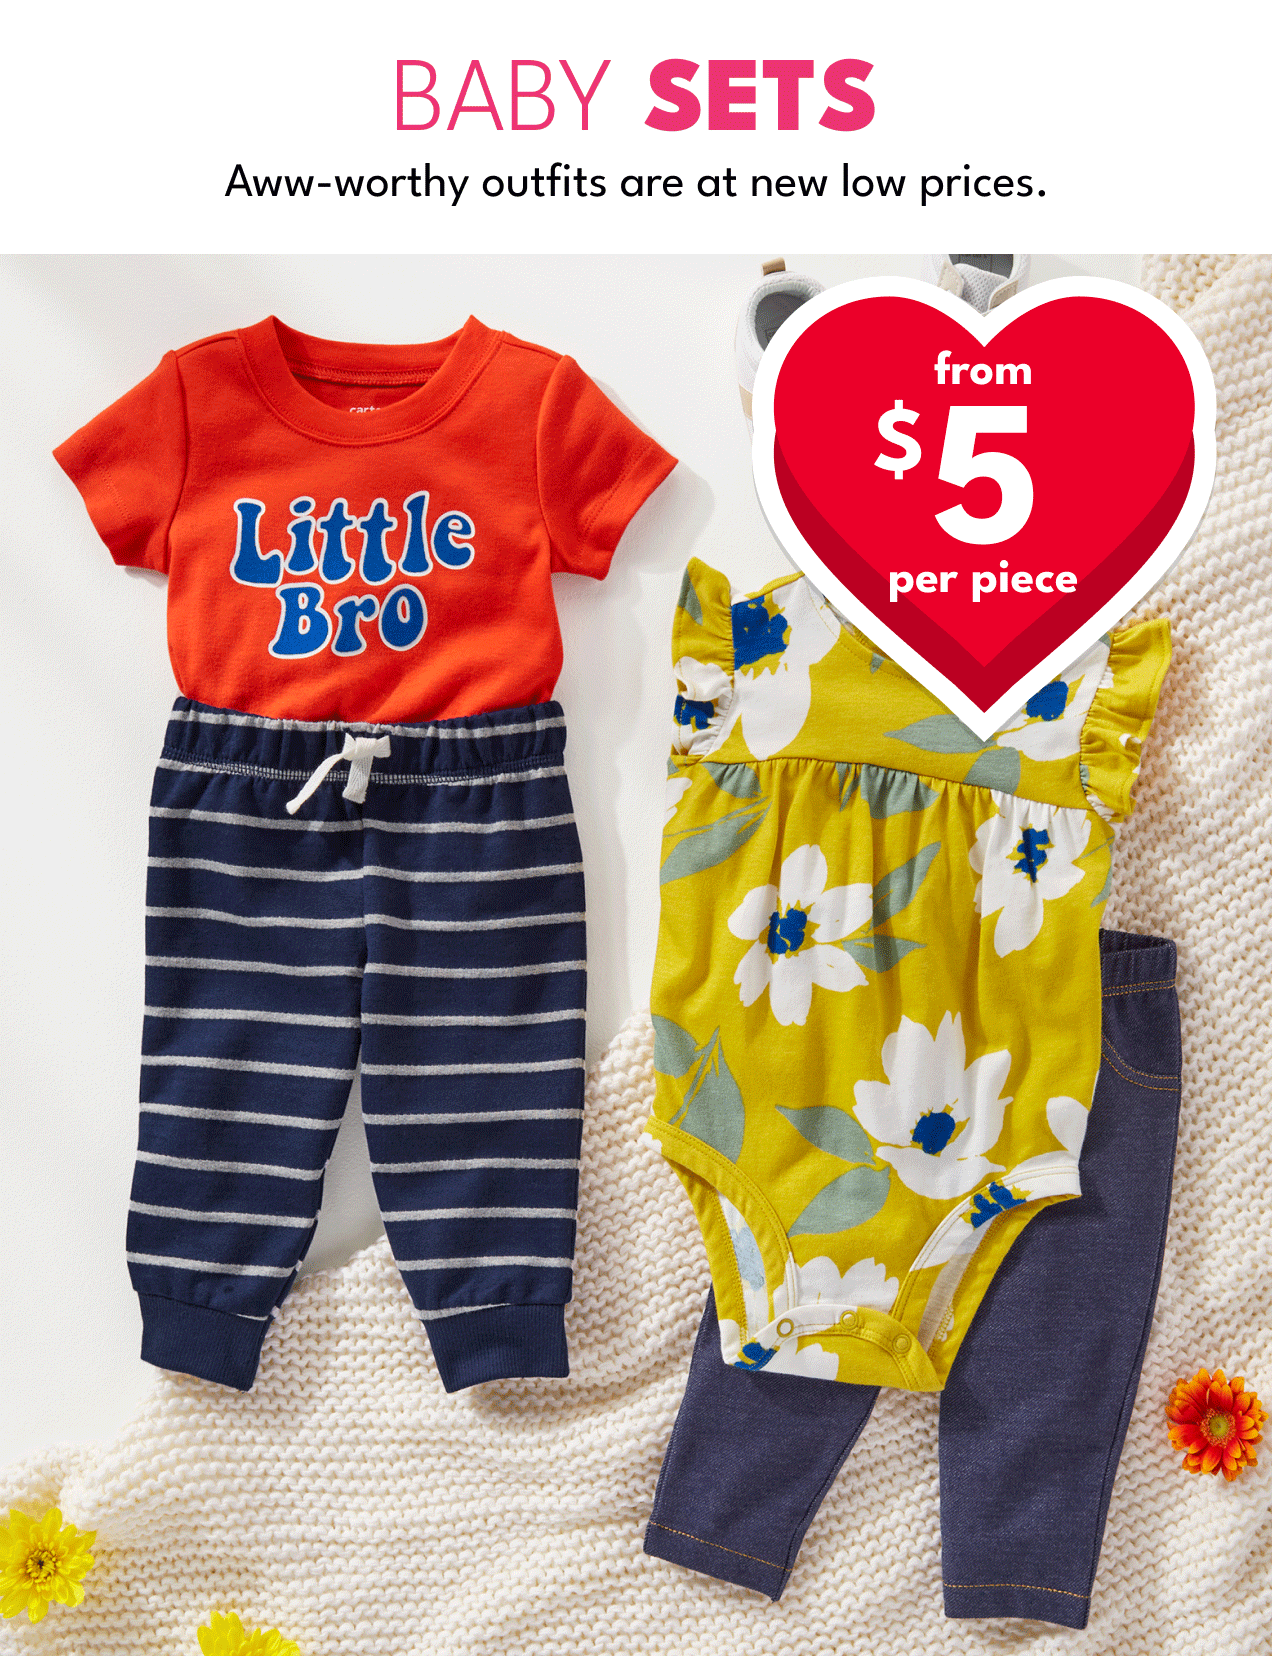 BABY SETS | Aww-worthy outfits are at new low prices. | \\$10 & up | from \\$5 per piece